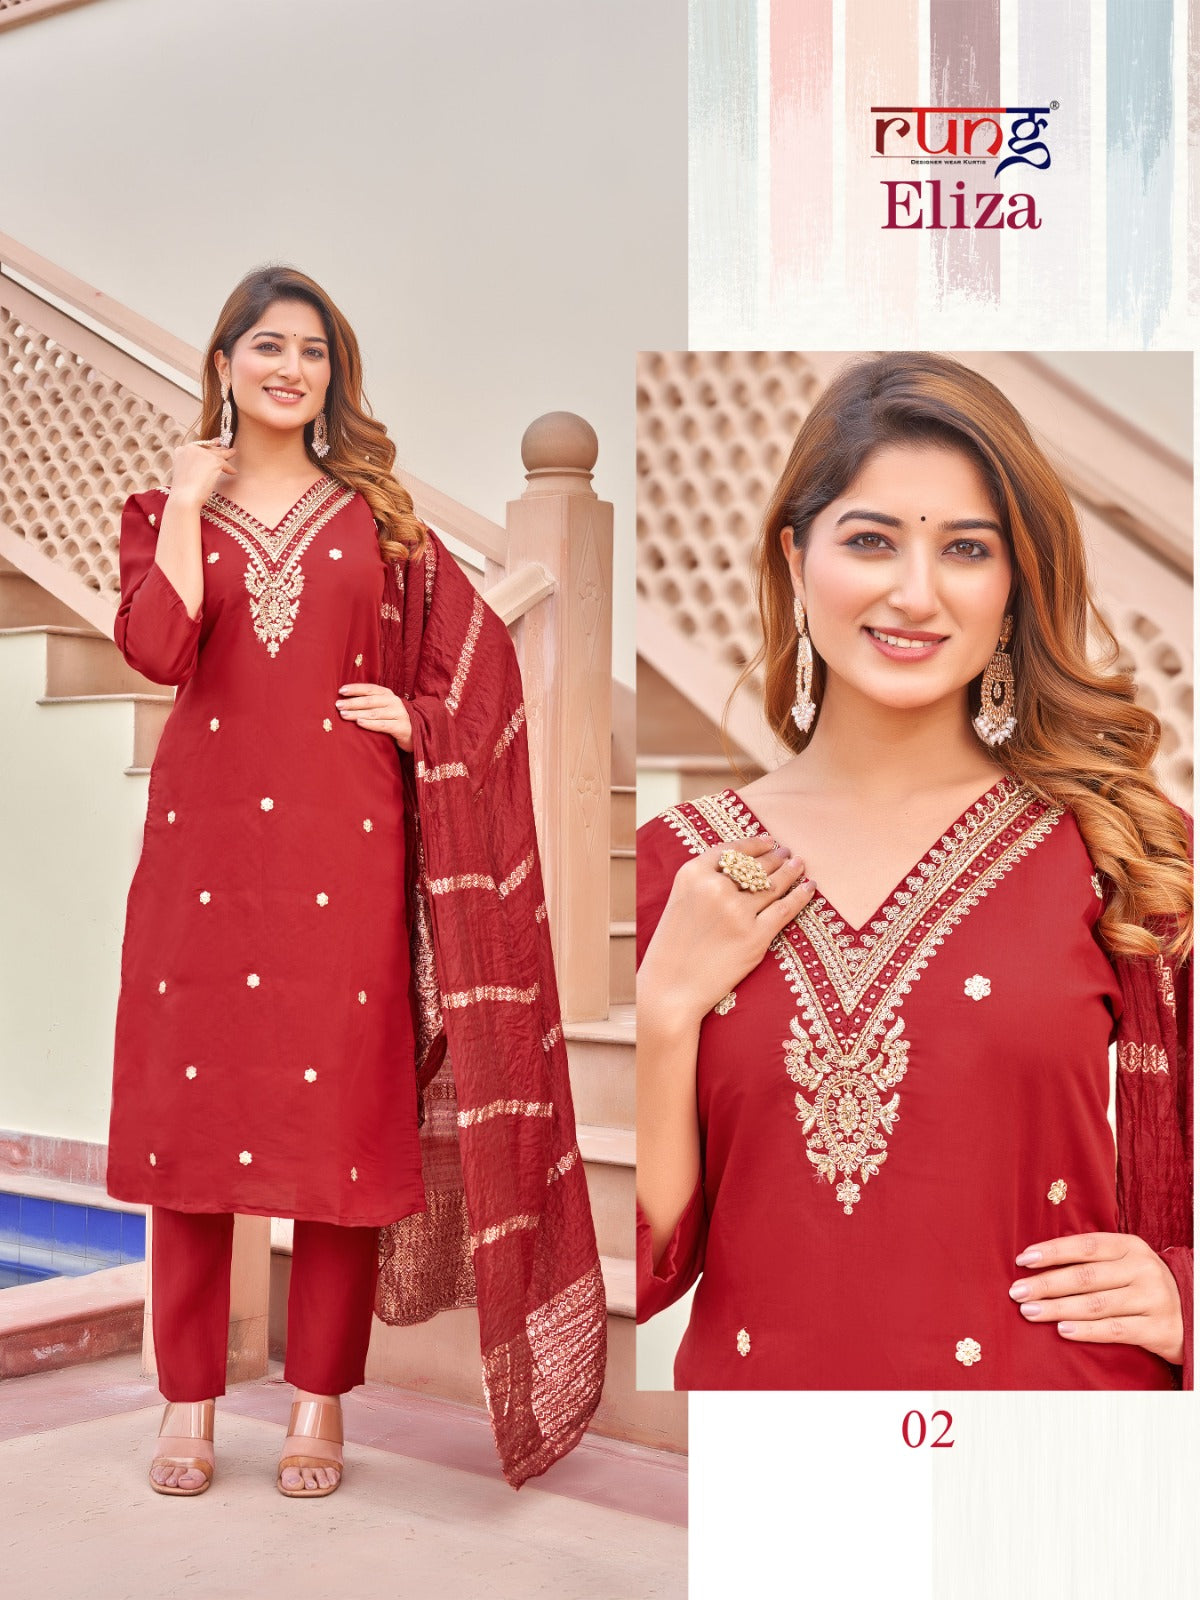 Eliza Rung Roman Silk Readymade Pant Style Suits